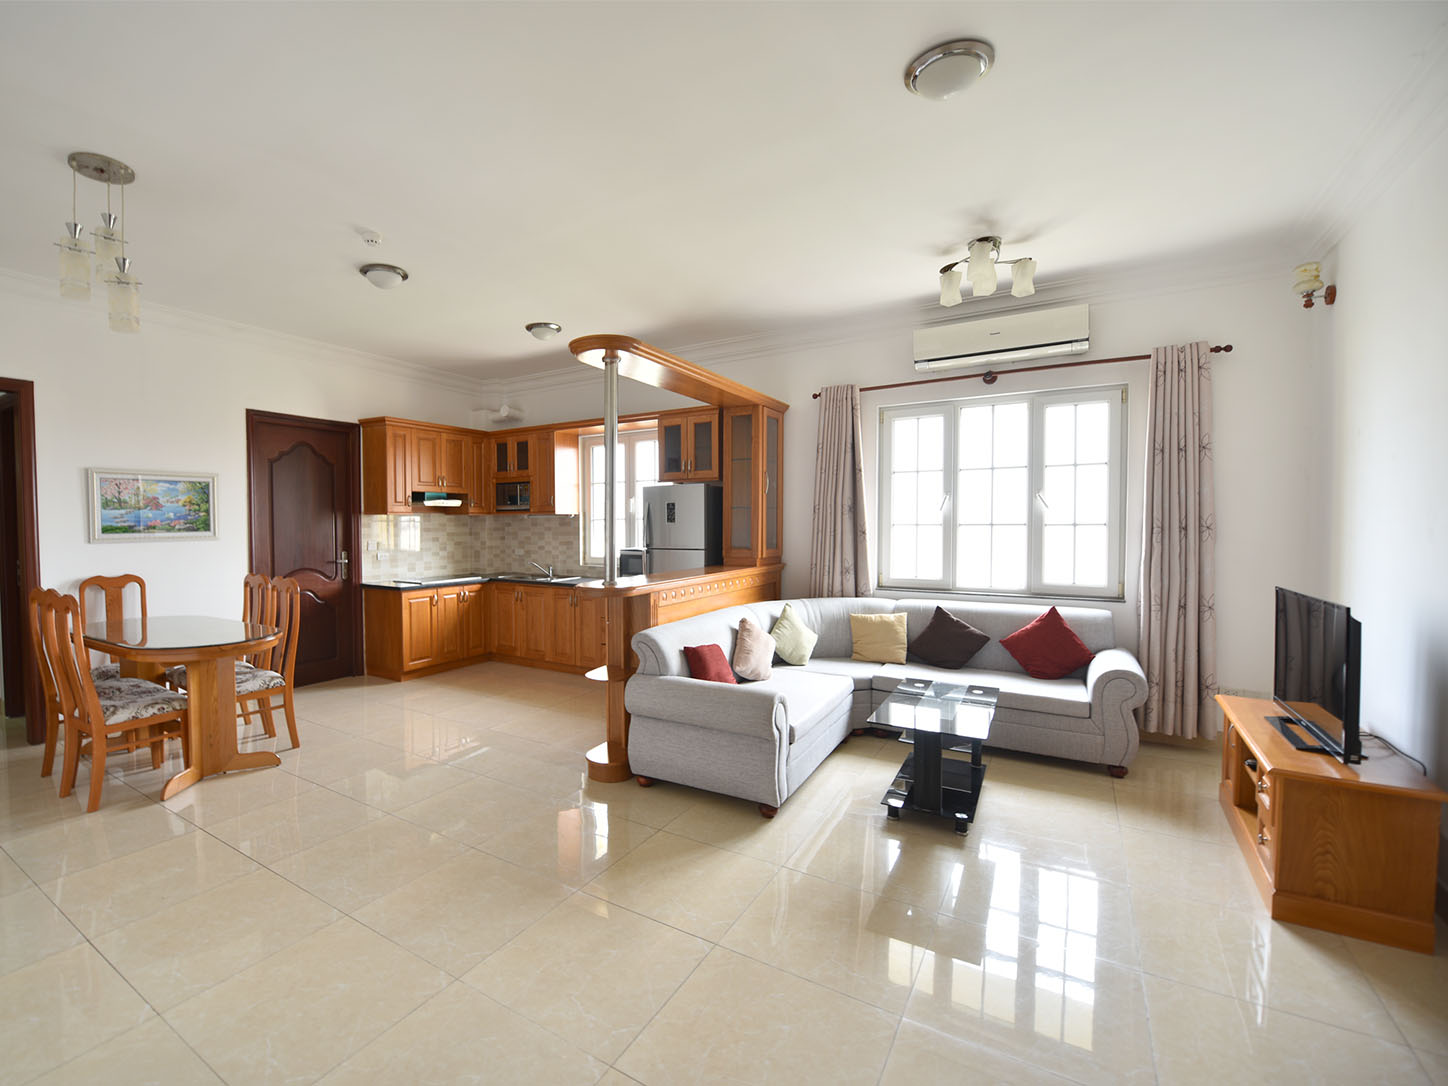 7 Euro Residence Service apartment district 2 ho chi minh